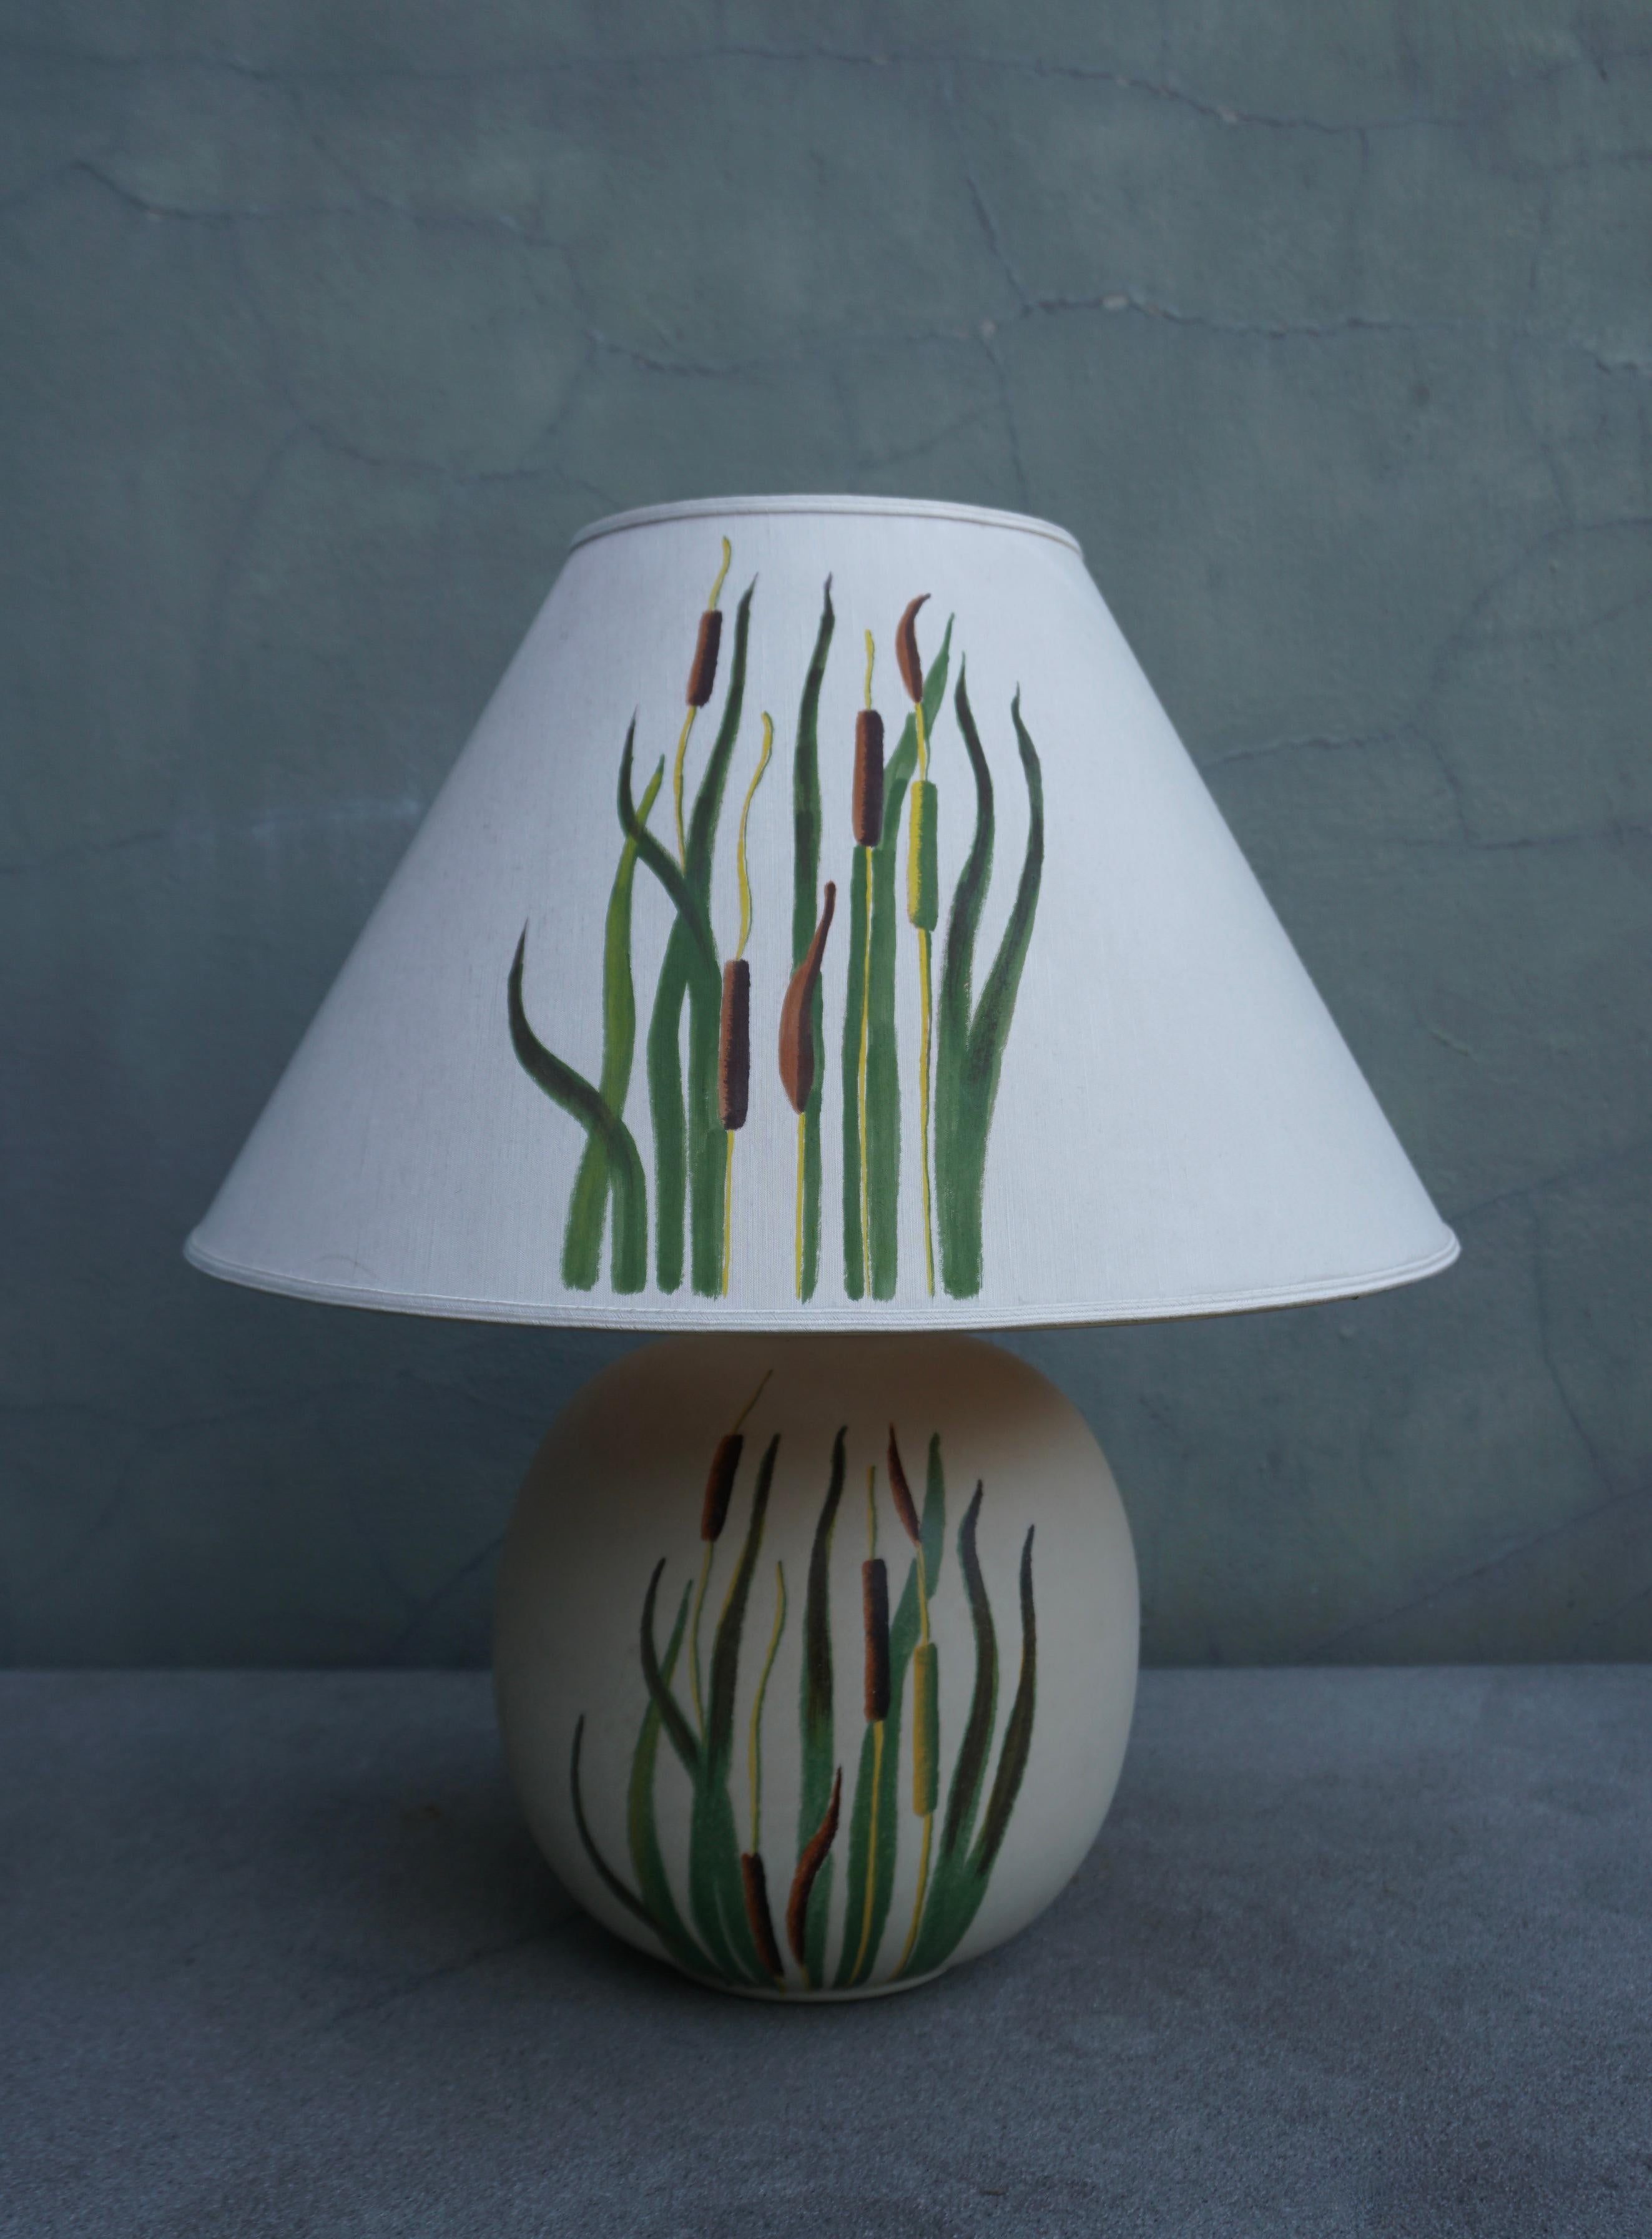 Painted Ceramic Table Lamp with Botanical Representation of Cattails Grass For Sale